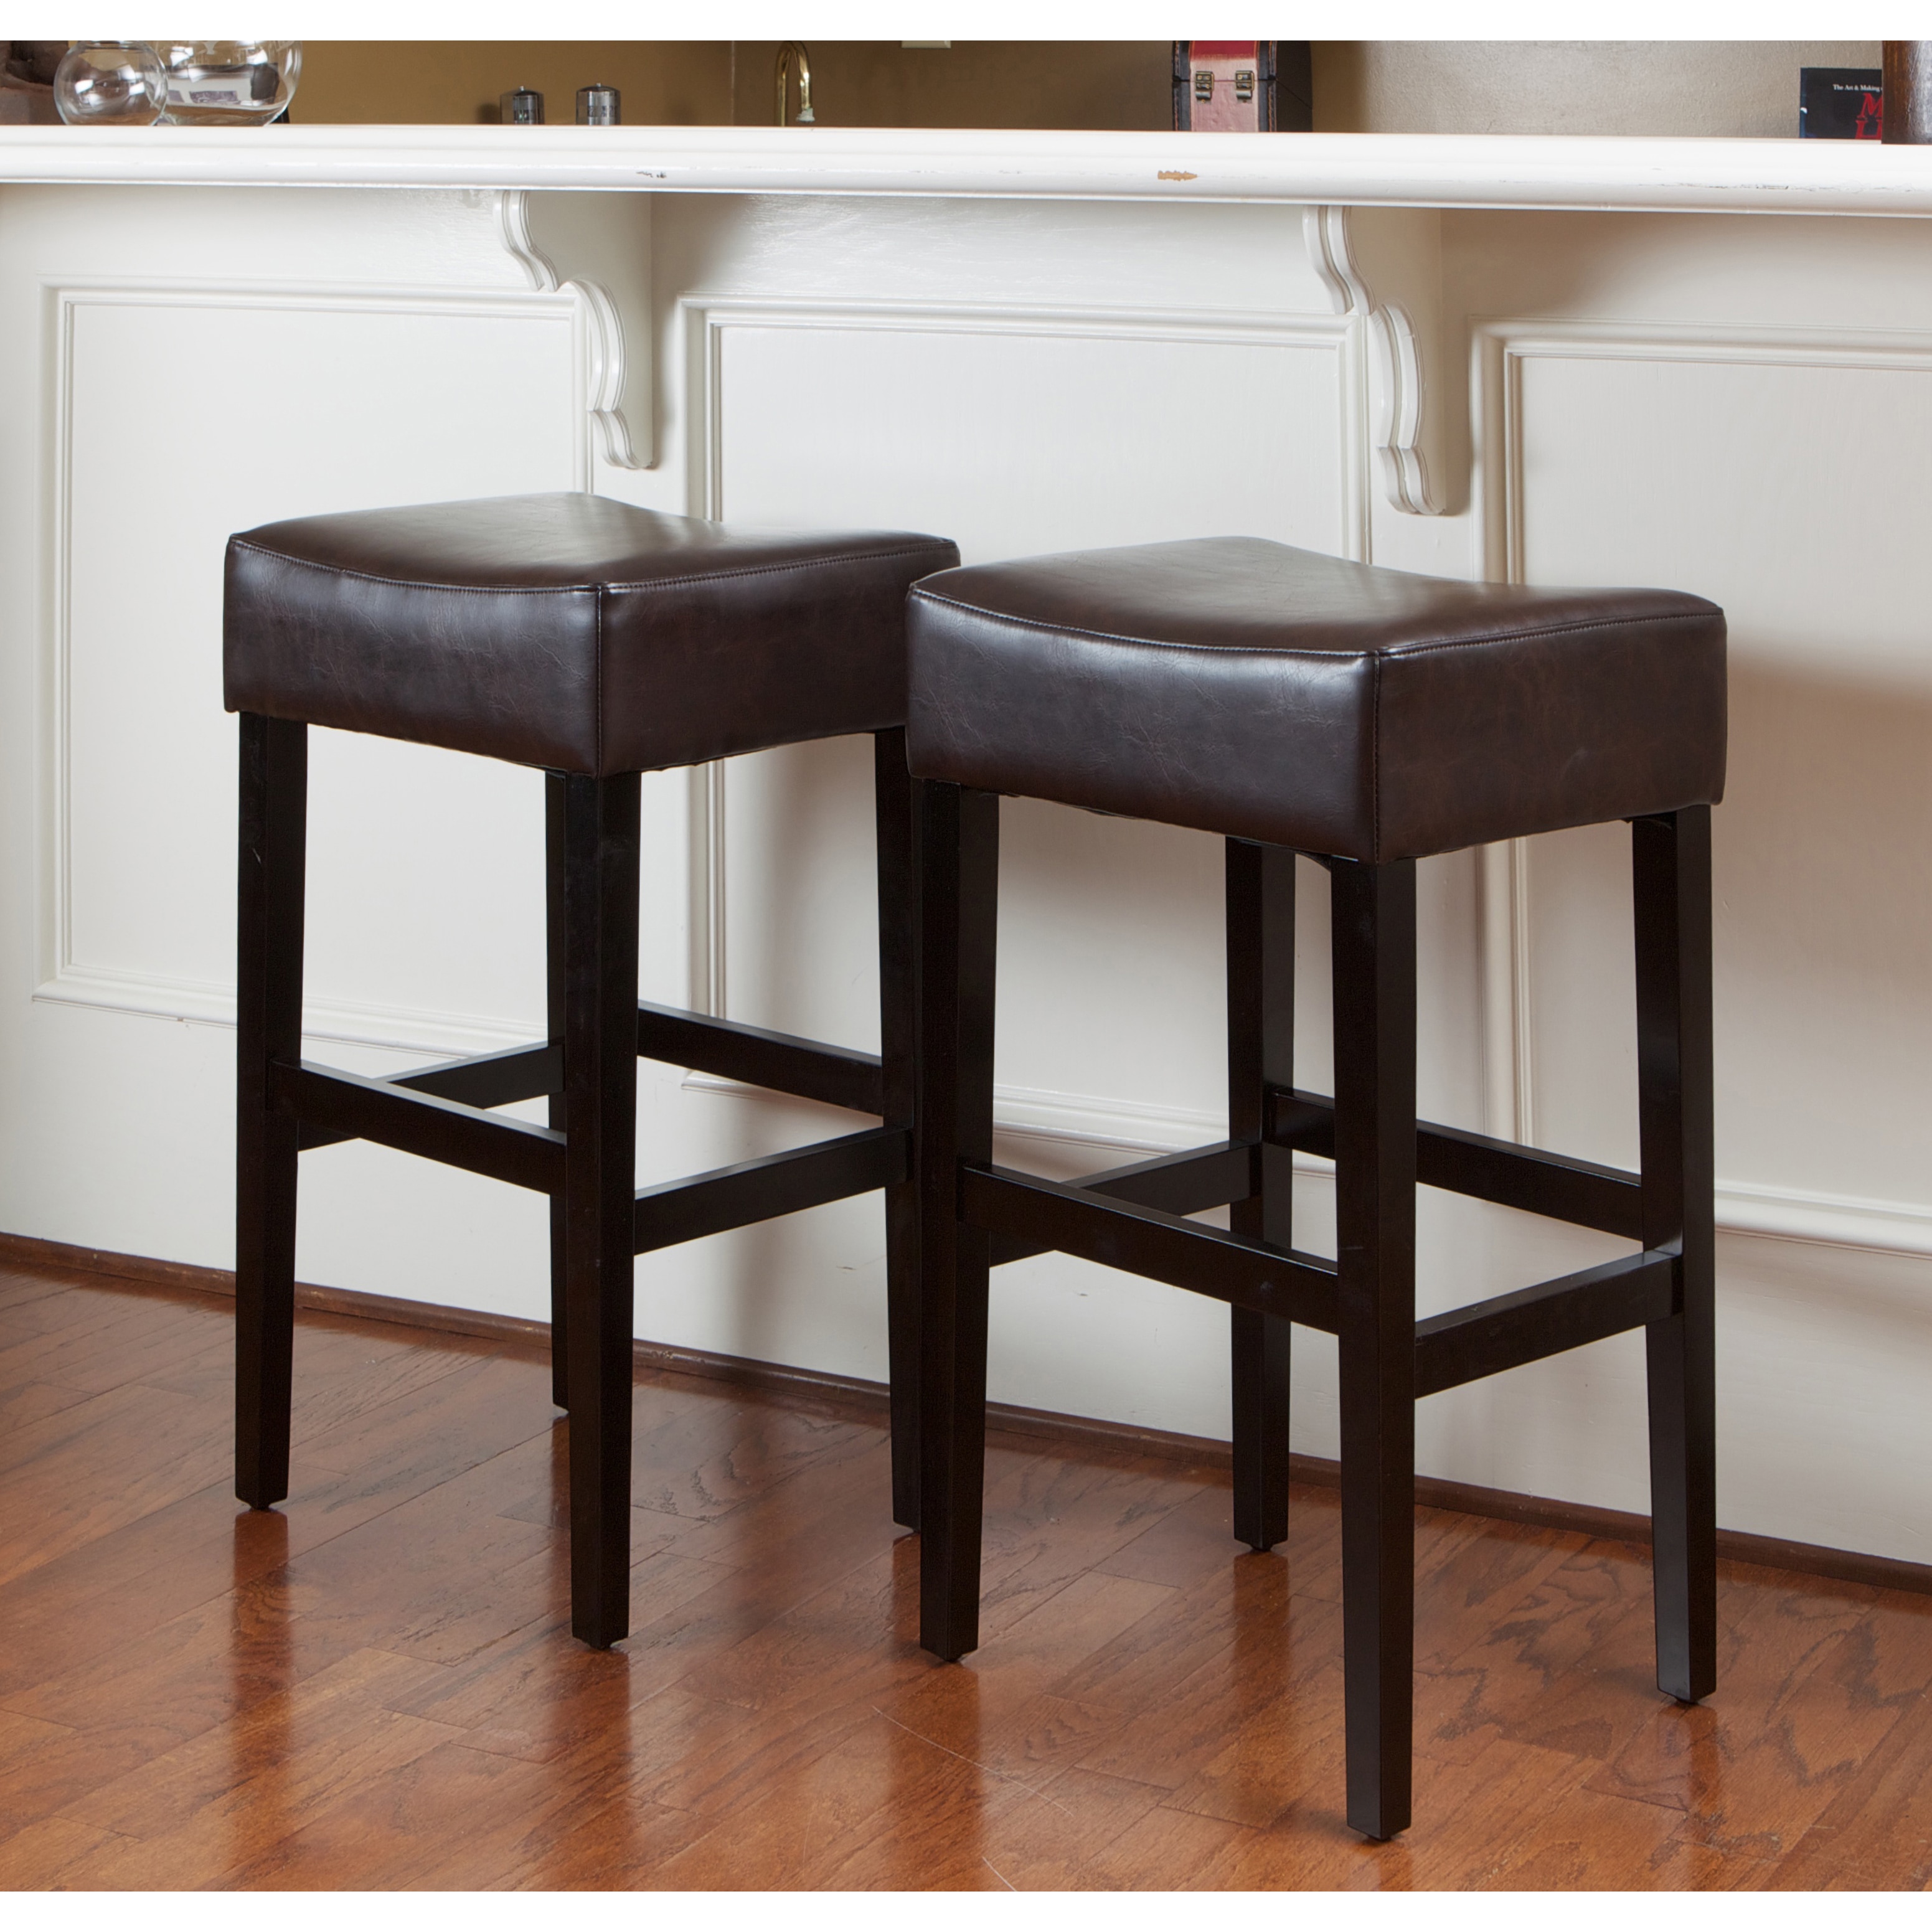 Christopher Knight Home Lopez Brown Leather Backless Bar Stools Set Of 2 7681174d 97d7 447d 9523 E74b3b730ebd 